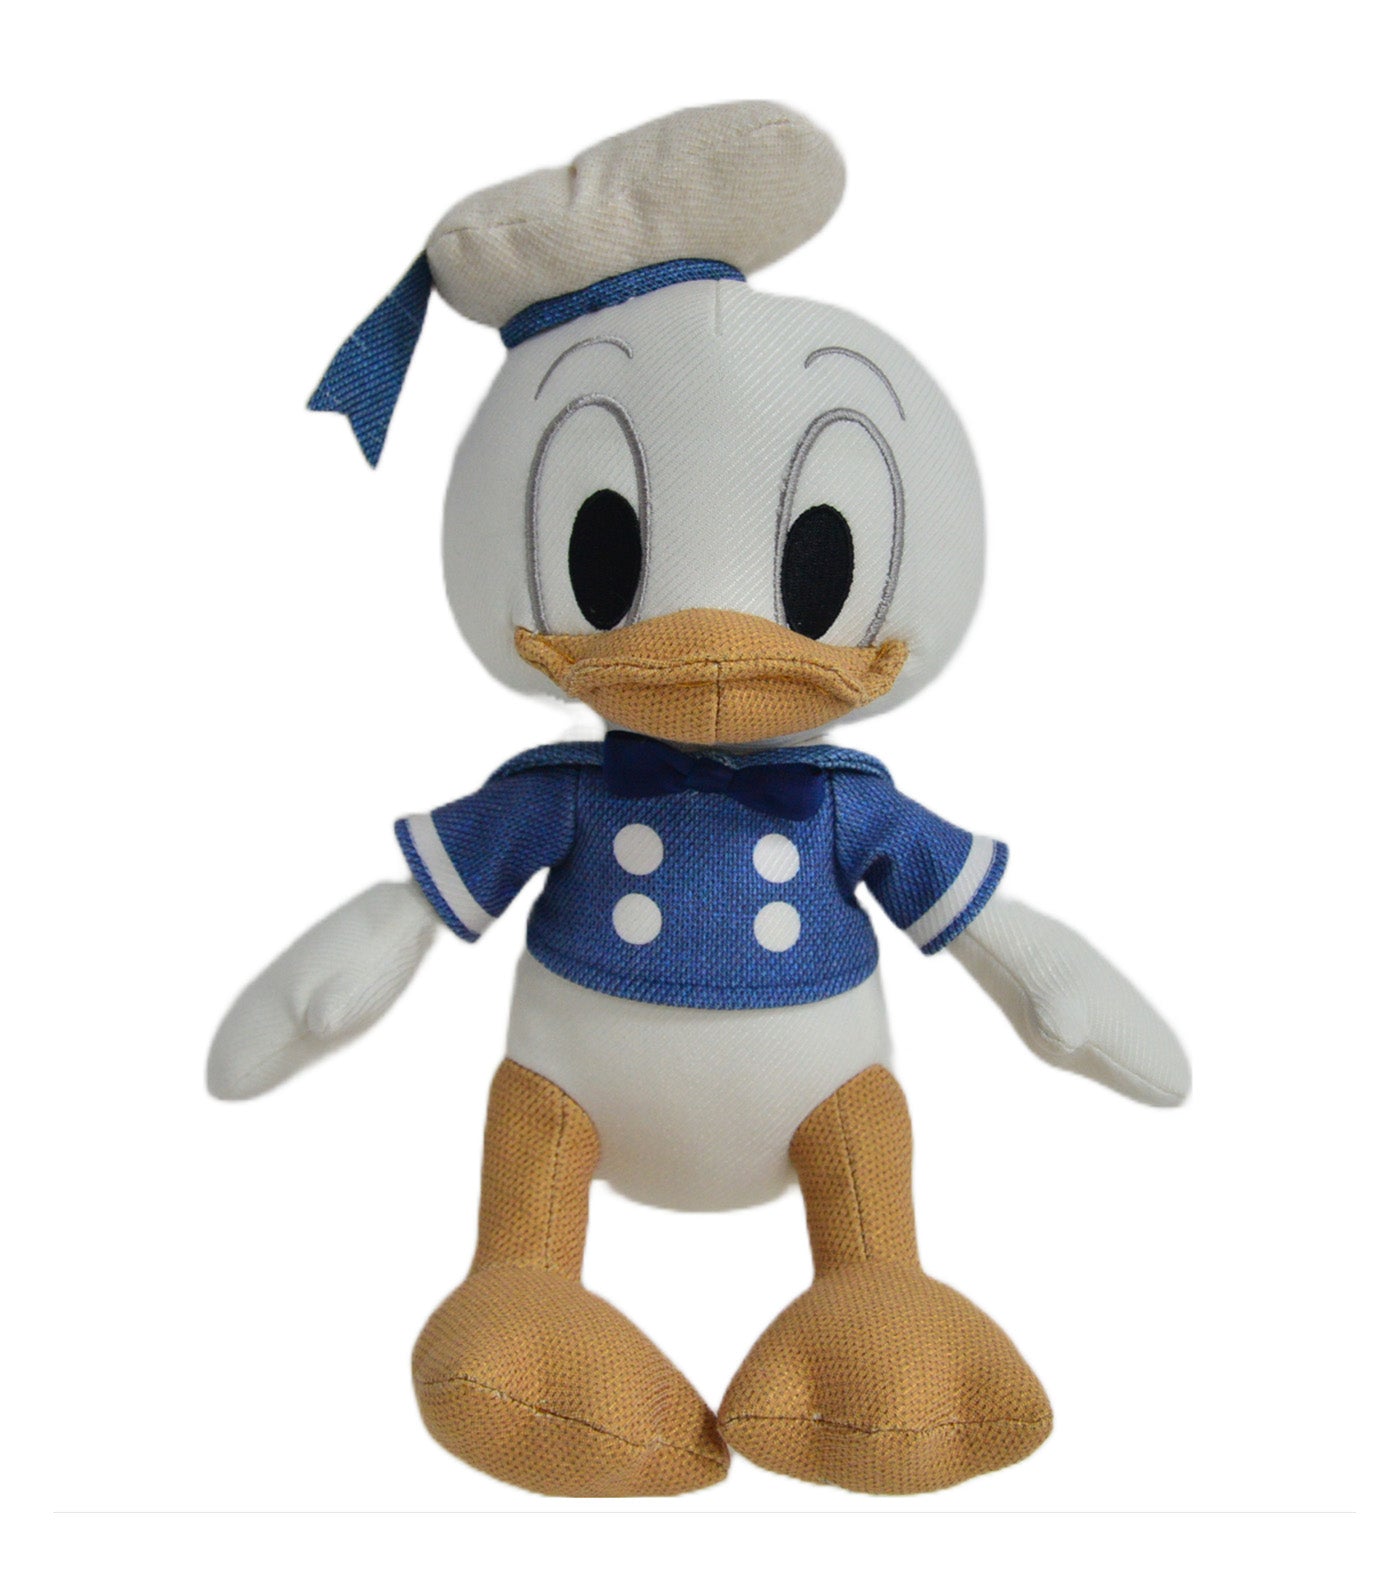 D100 Vintage Collection Donald Duck Plush - 8in